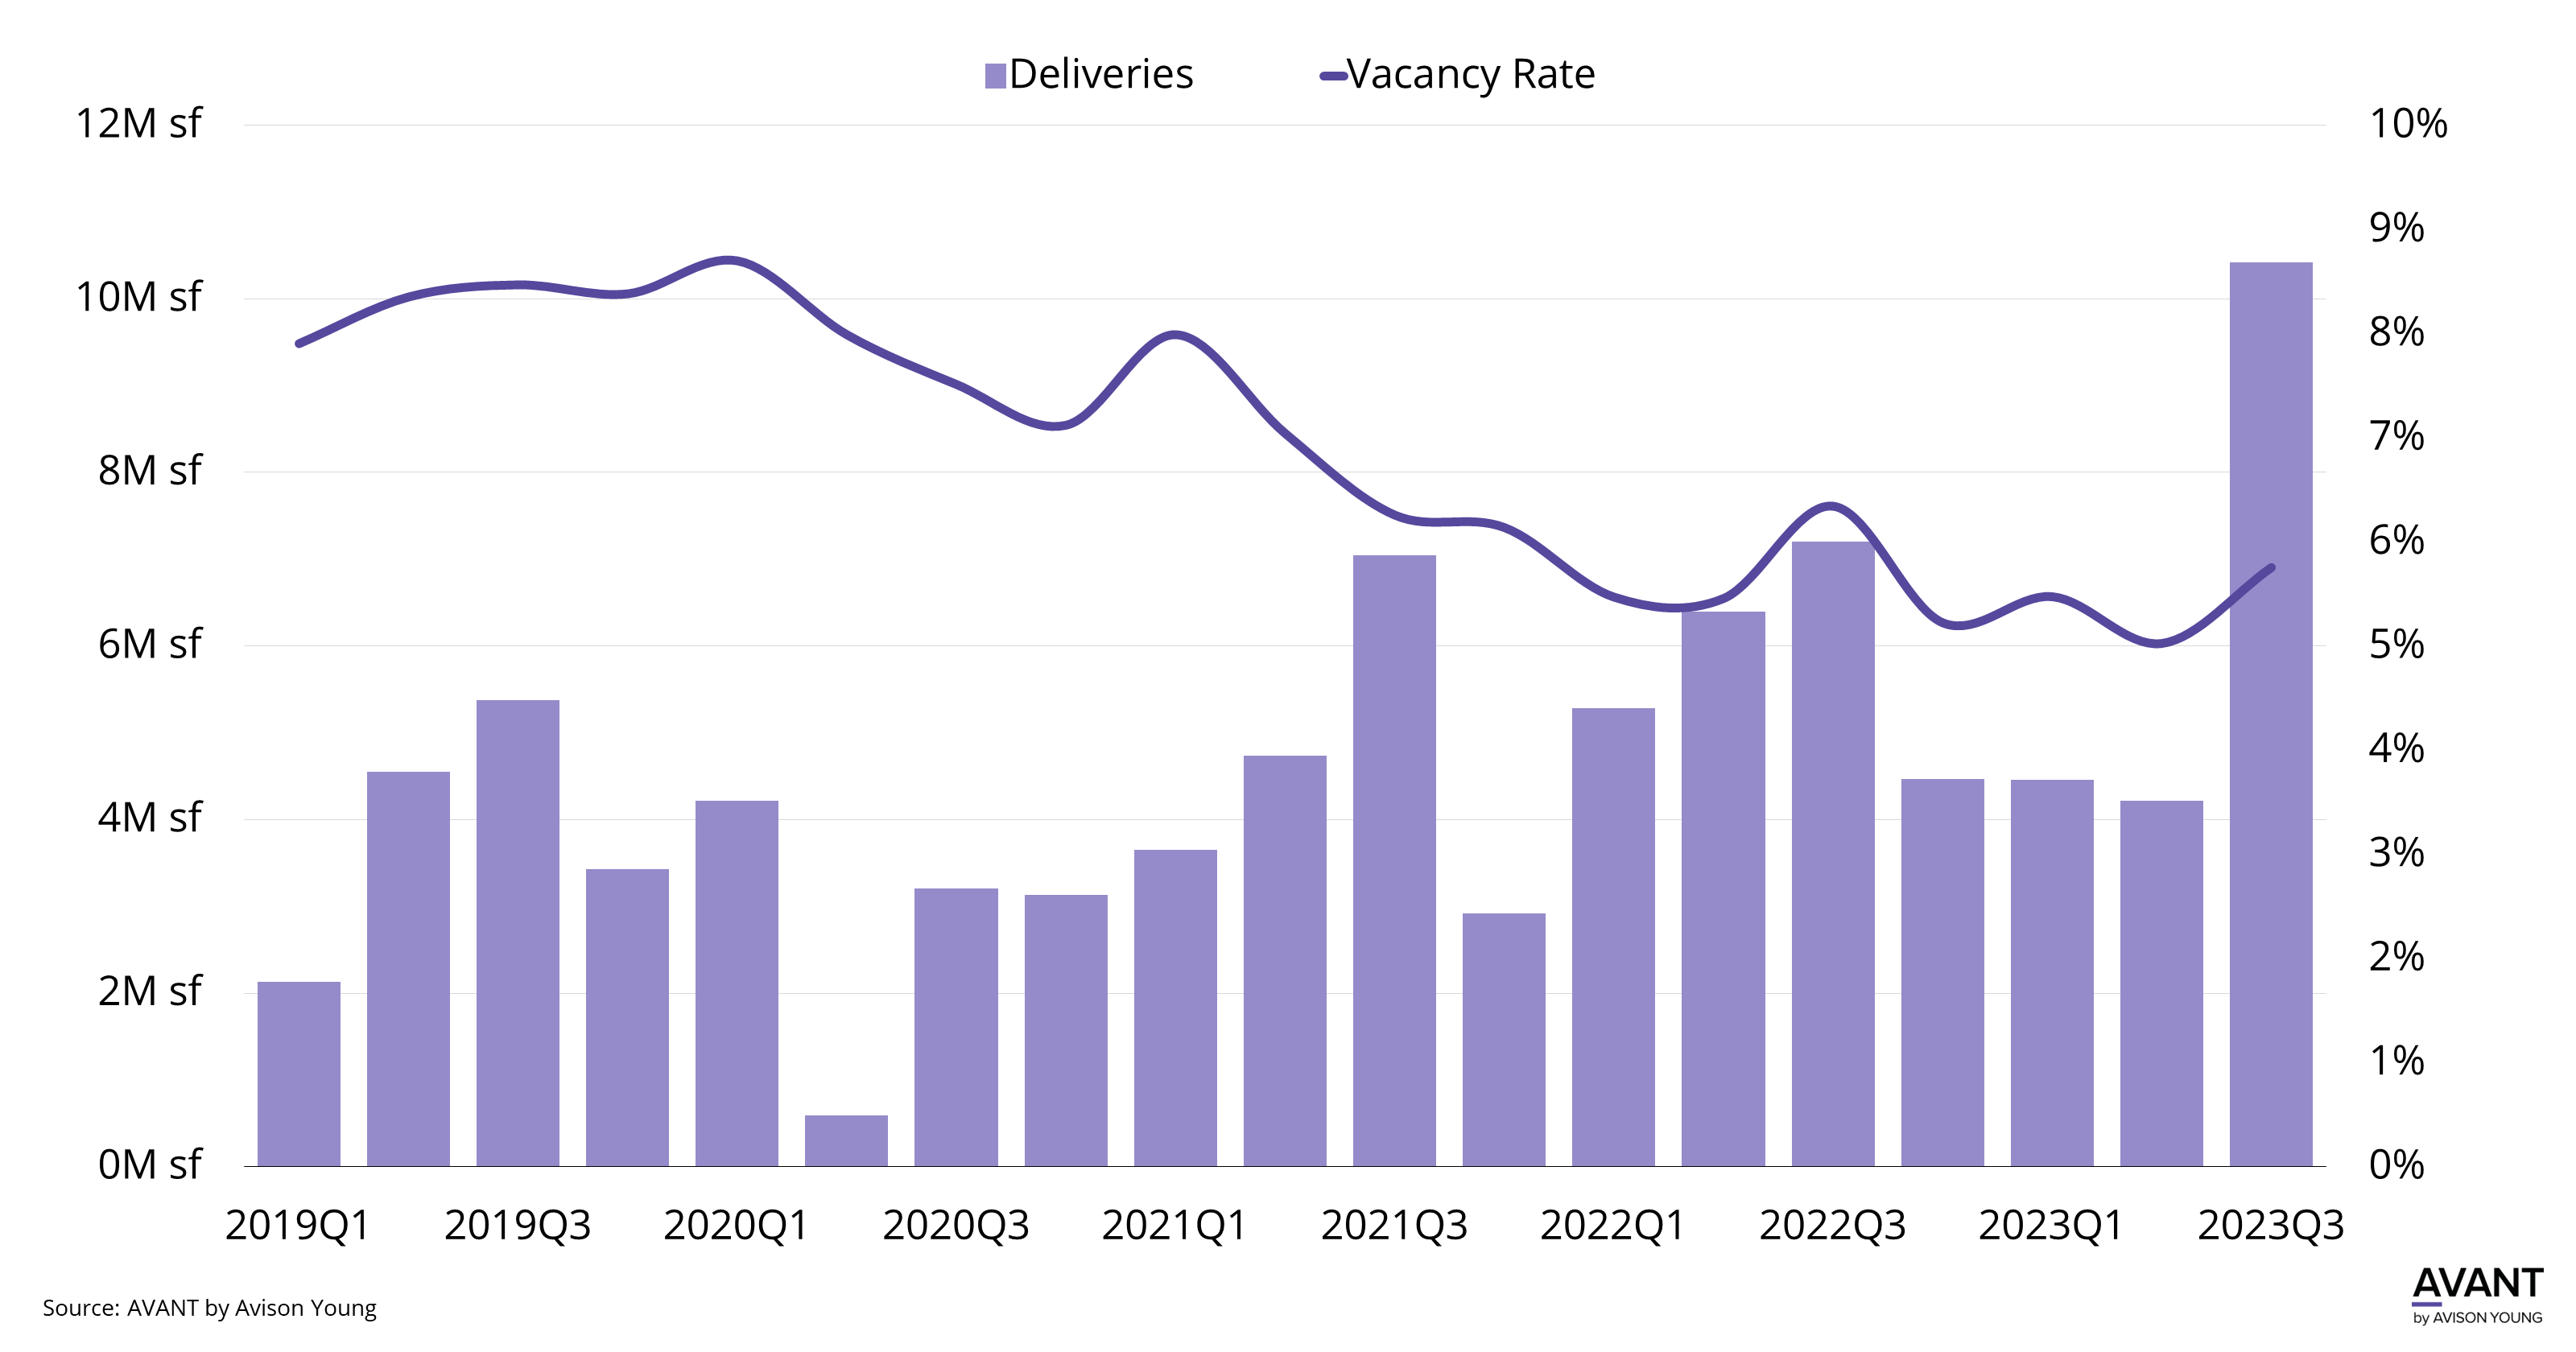 Chart shows delivery of big box product by year in Chicago industrial market along with year-to-year vacancy rate trends